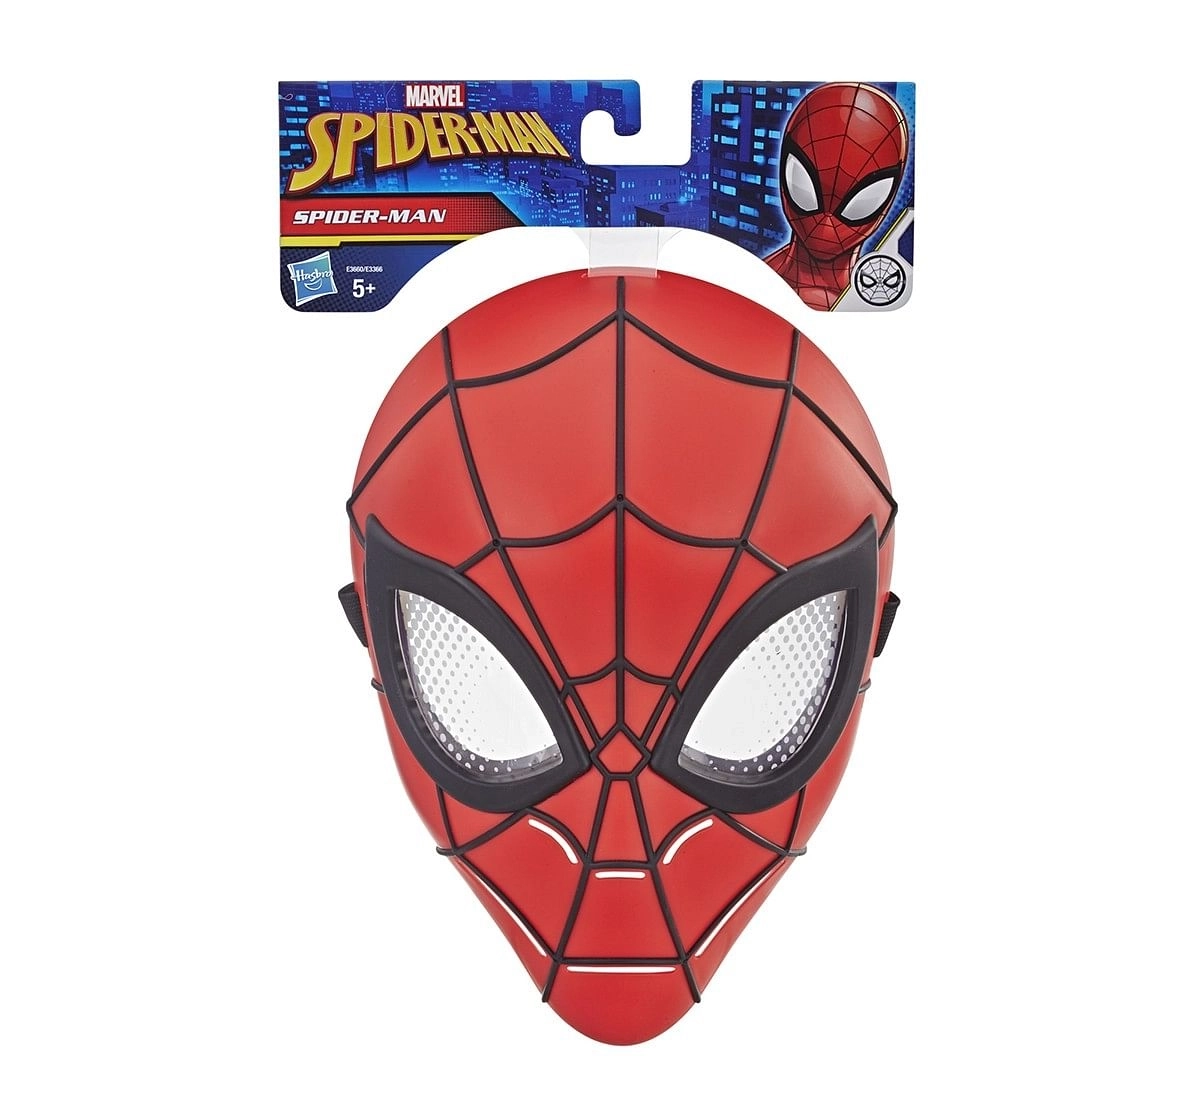 Marvel Spider-Man Hero Mask Action Figures for age 5Y+ 